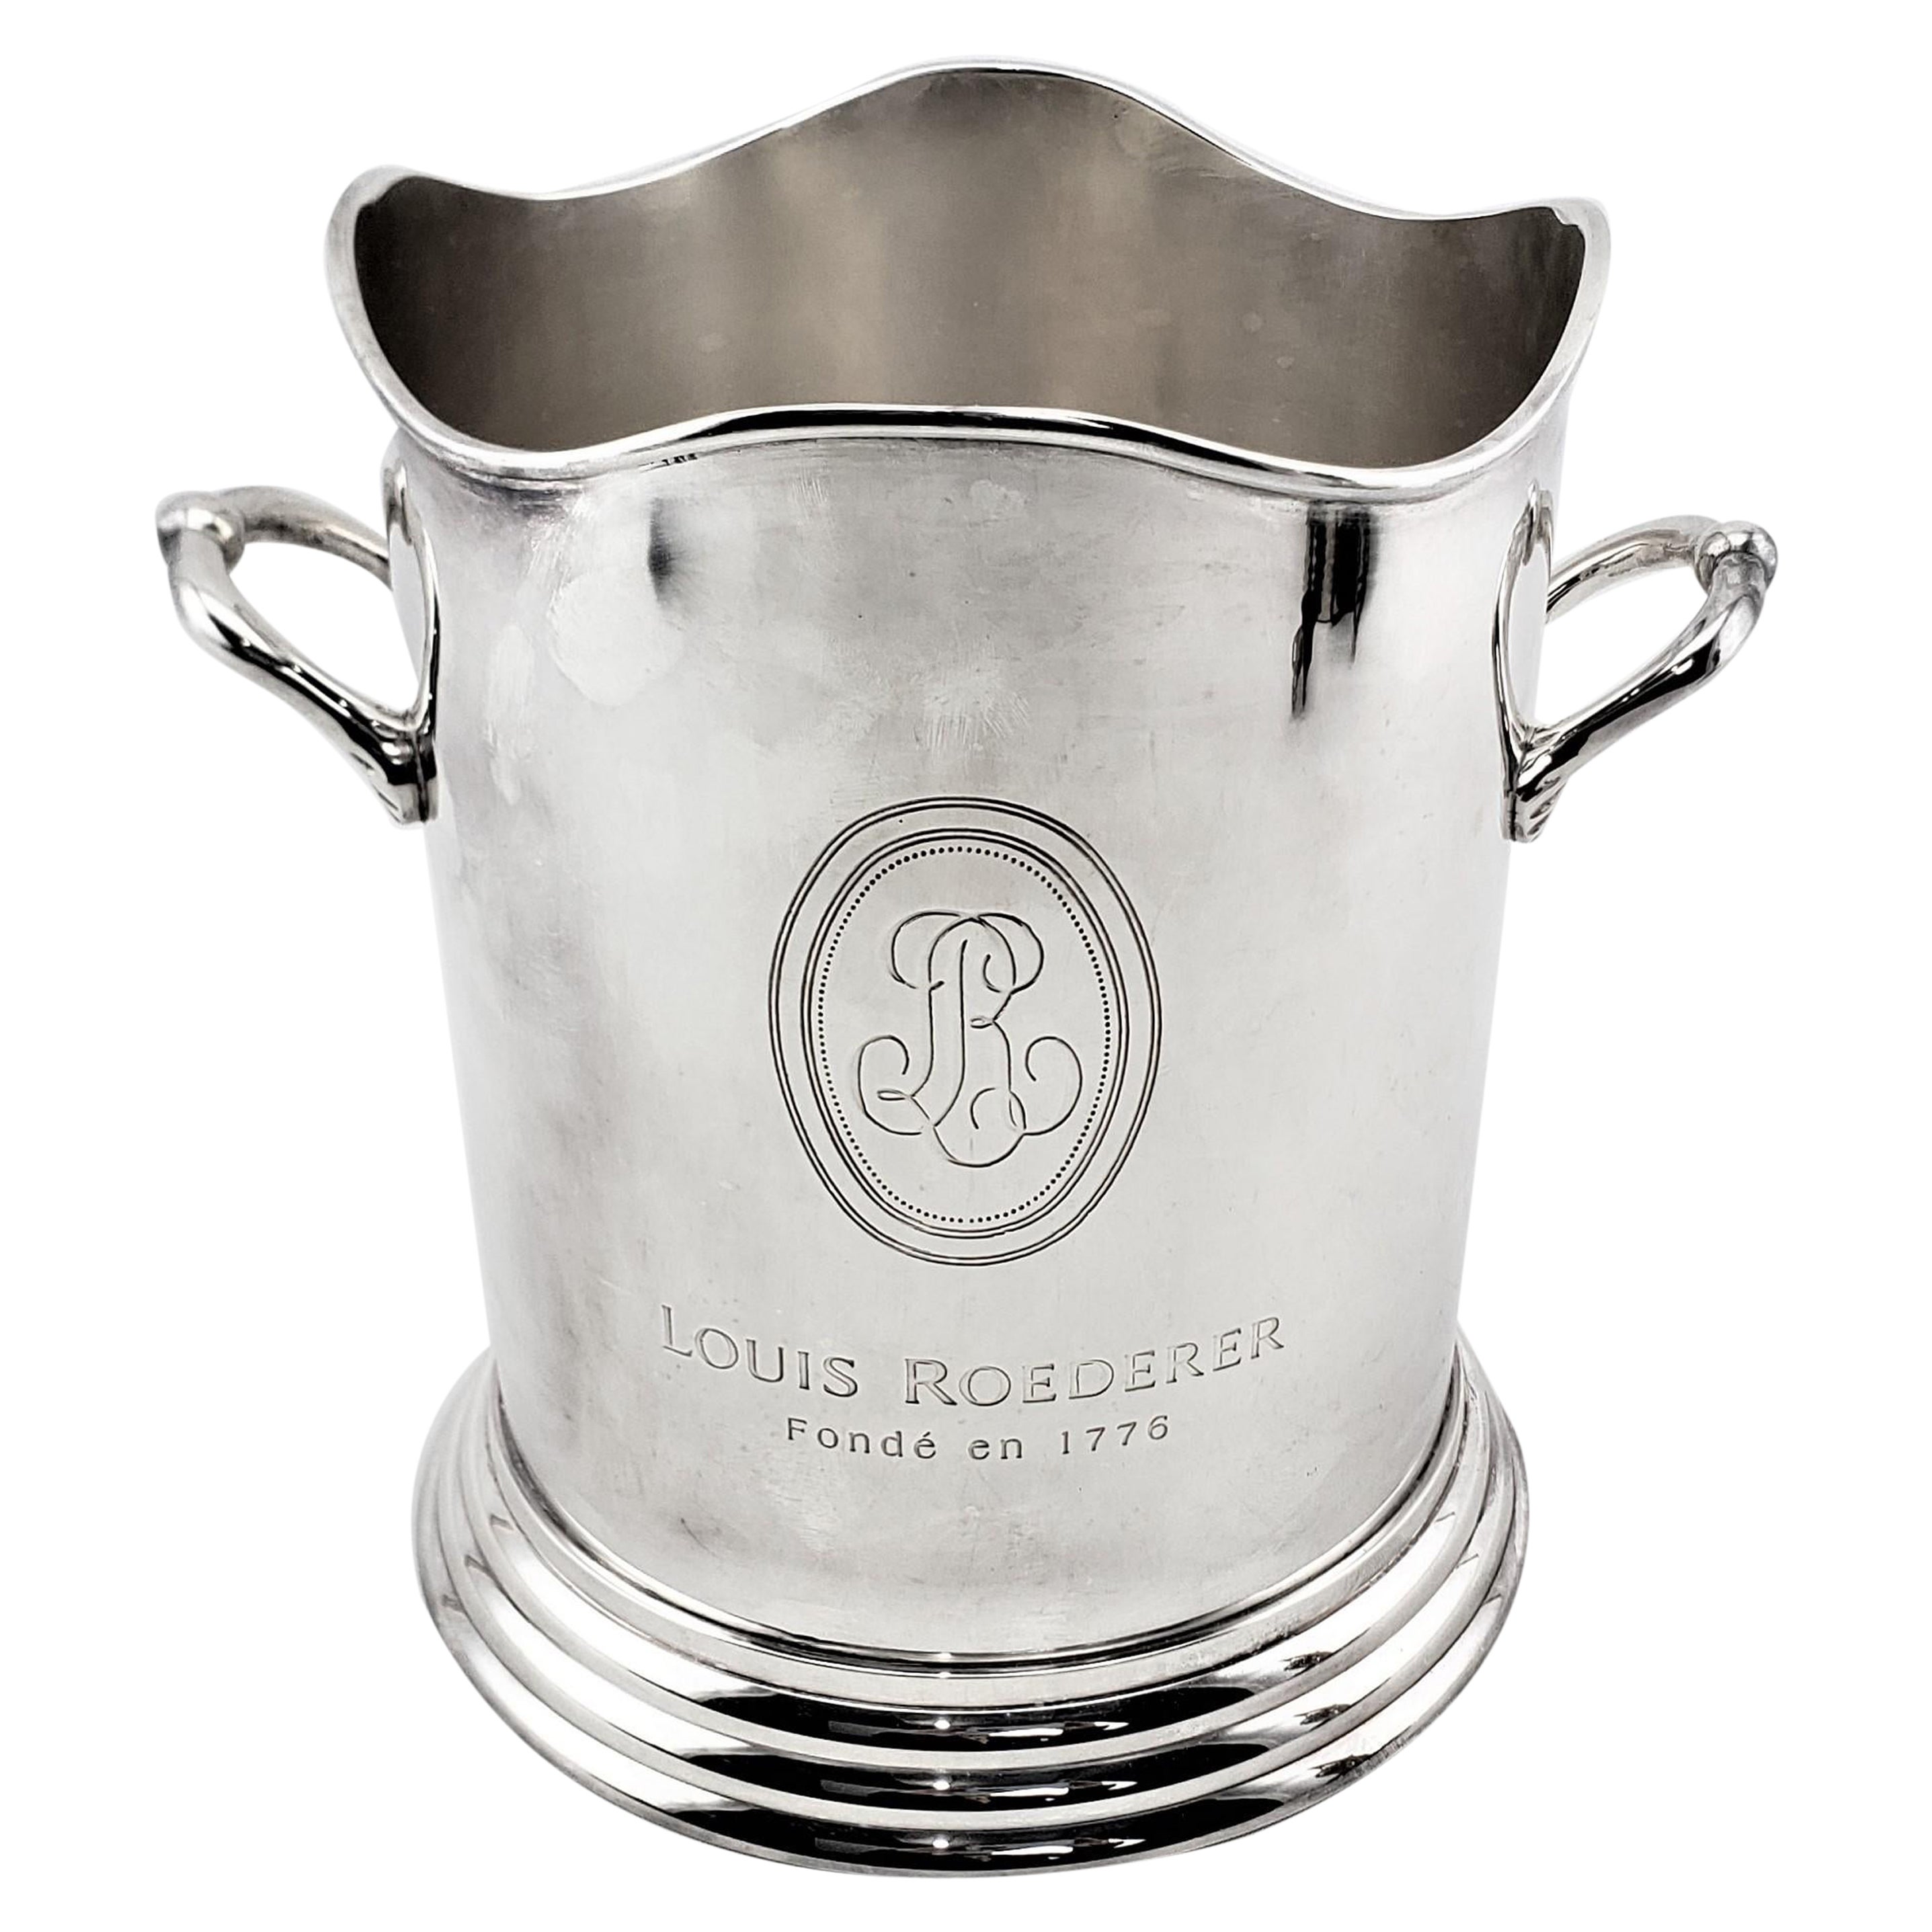 Louis Roederer Commemorative Mid-Century Era Chrome Plated Champagne Bucket